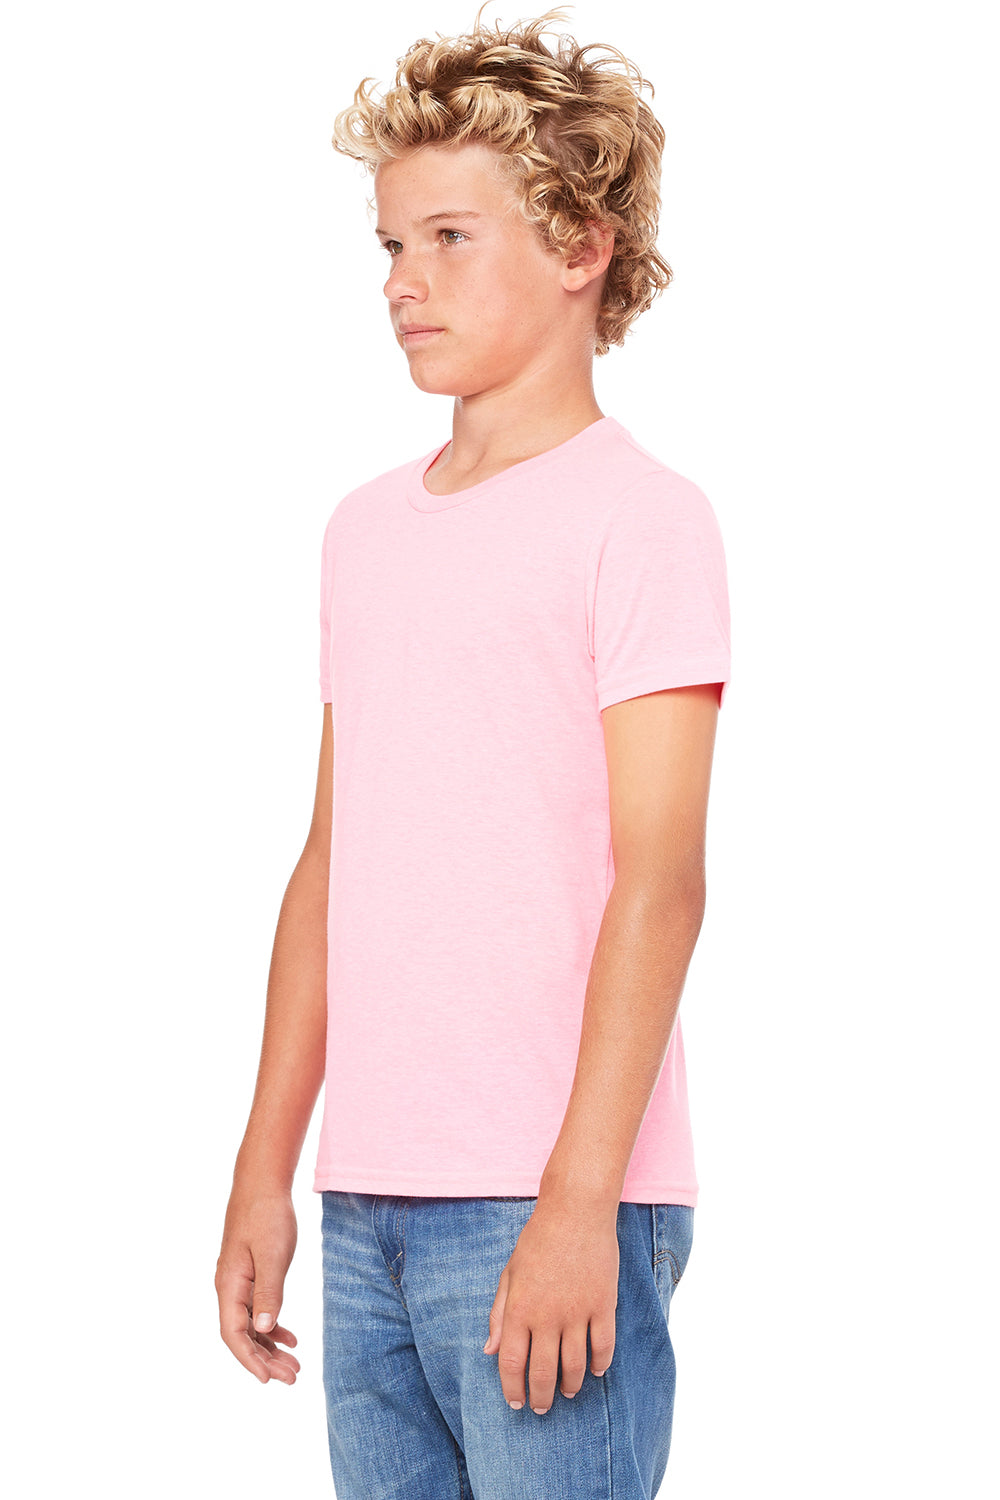 Bella + Canvas 3001Y Youth Jersey Short Sleeve Crewneck T-Shirt Neon Pink Model Side